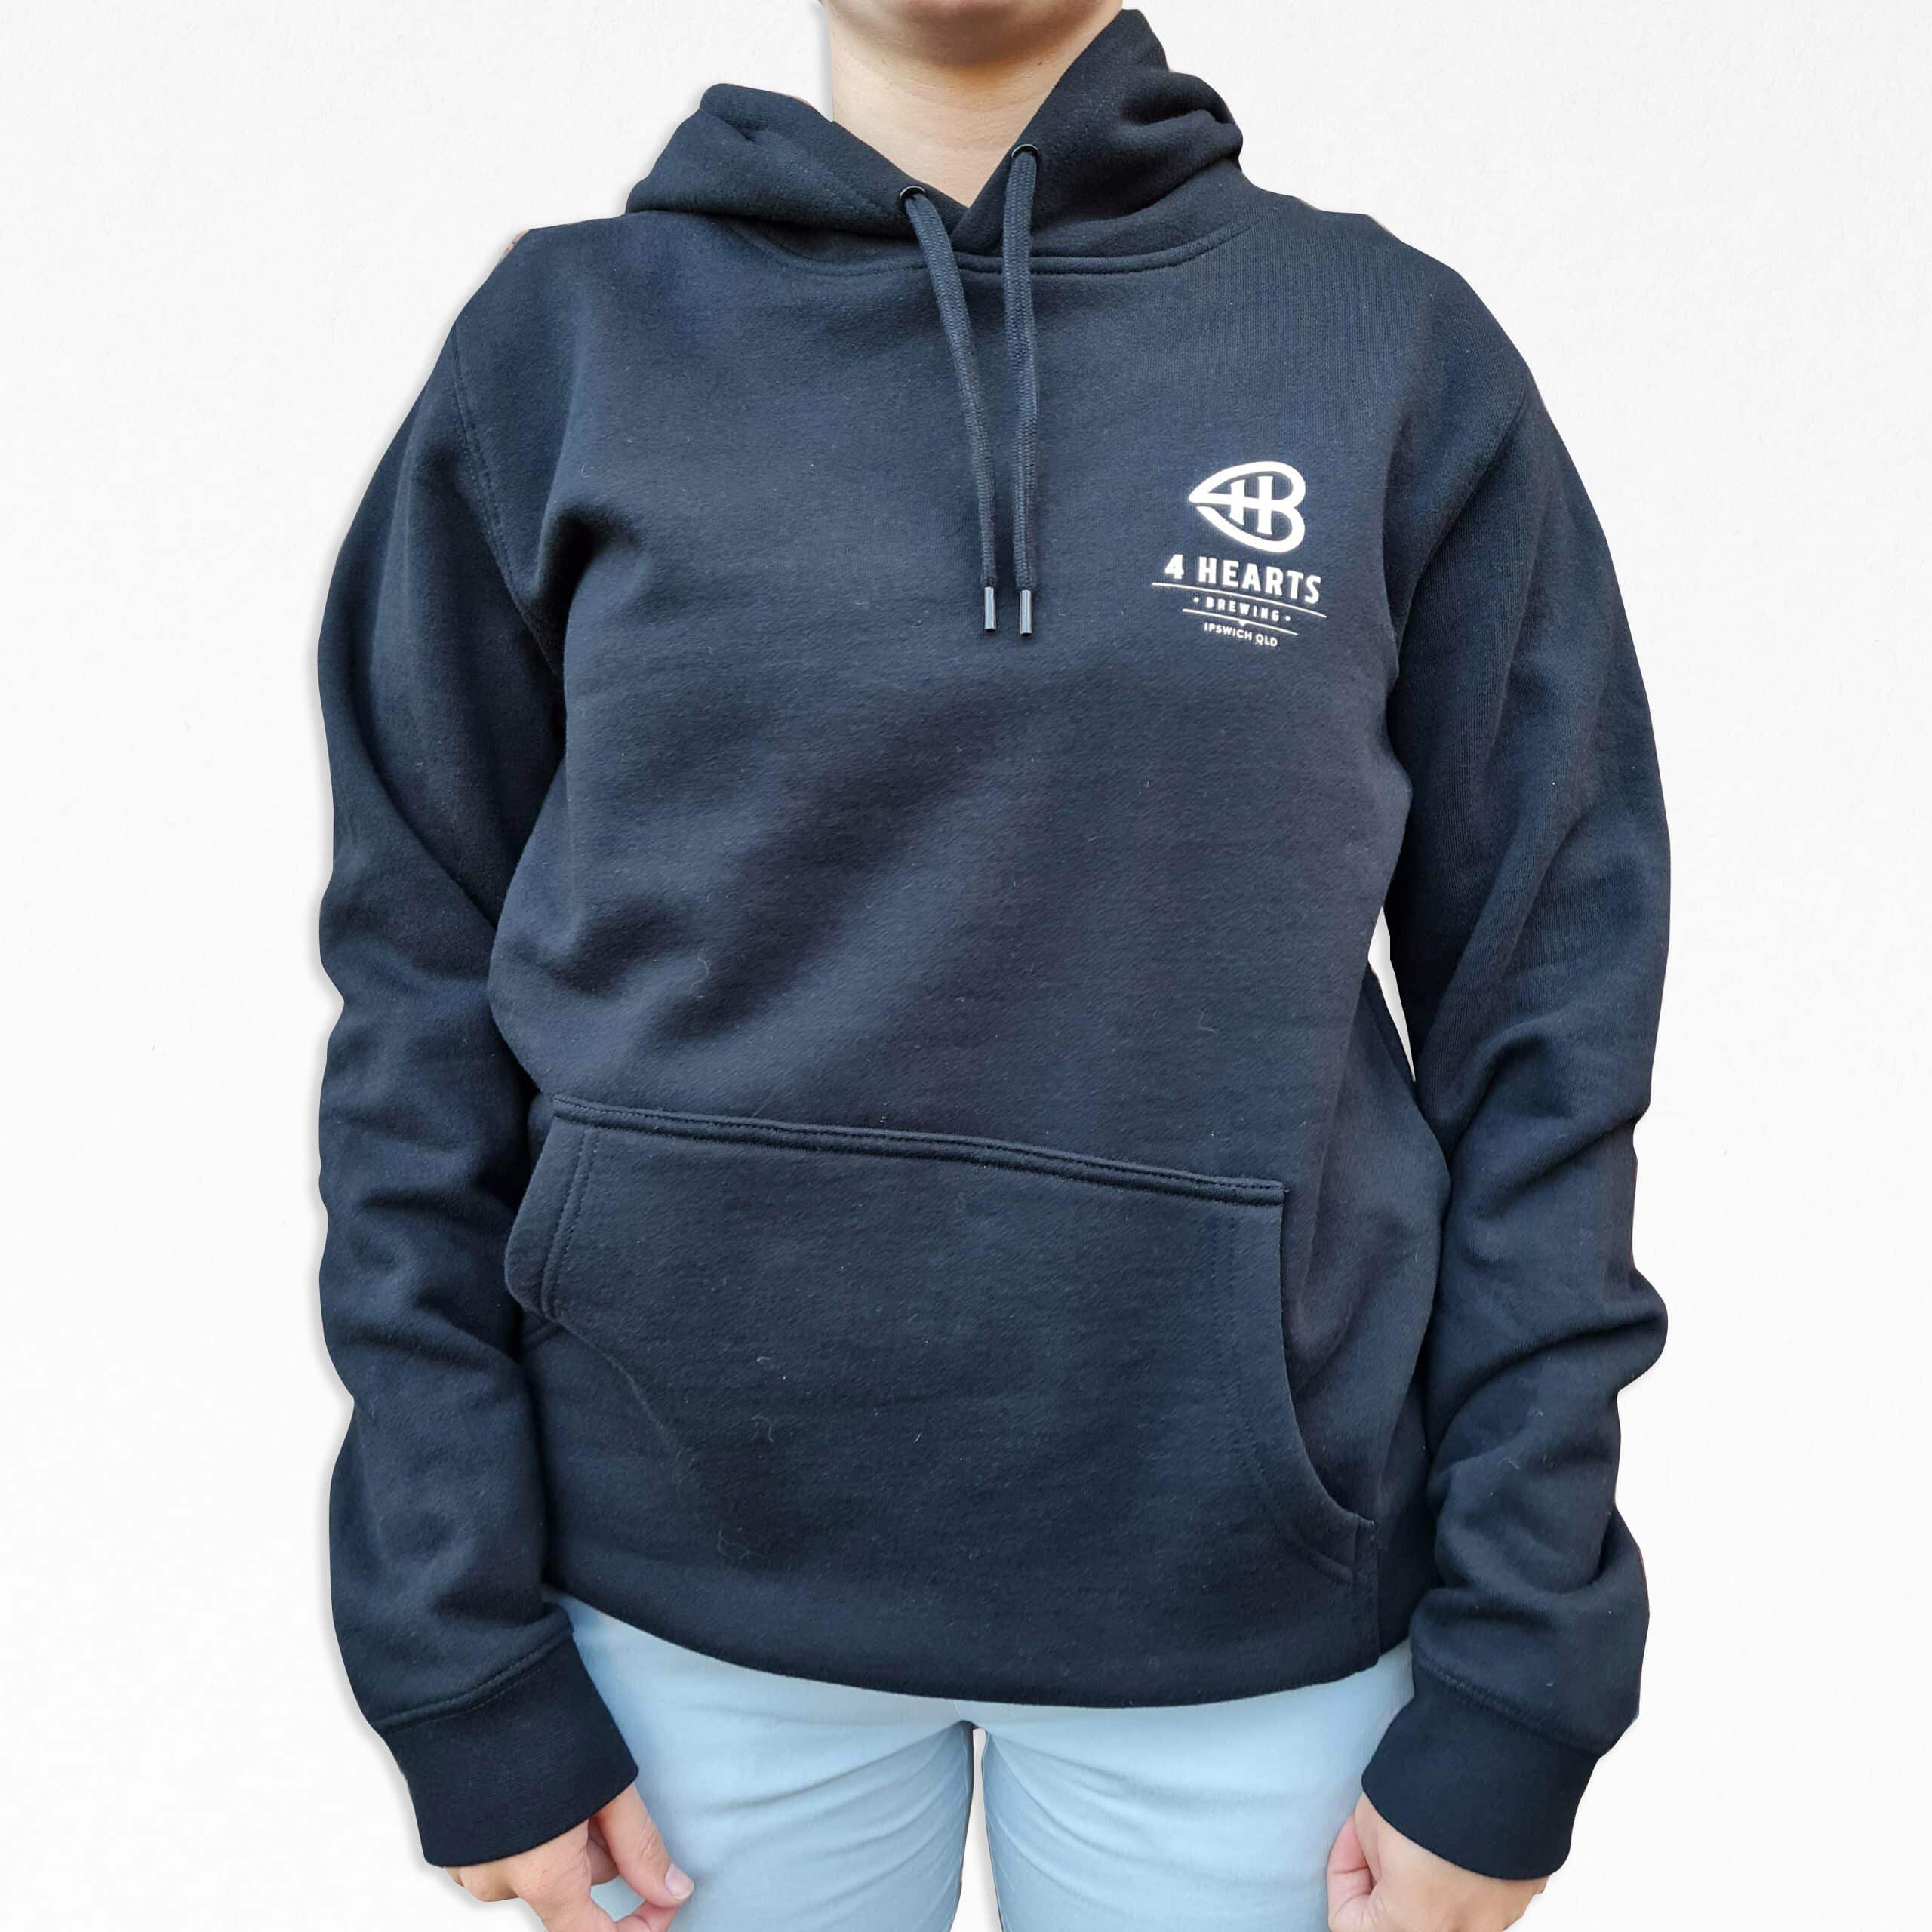 An image of the front of a black cotton hooded sweatshirt featuring the 4 Hearts logo on the chest.